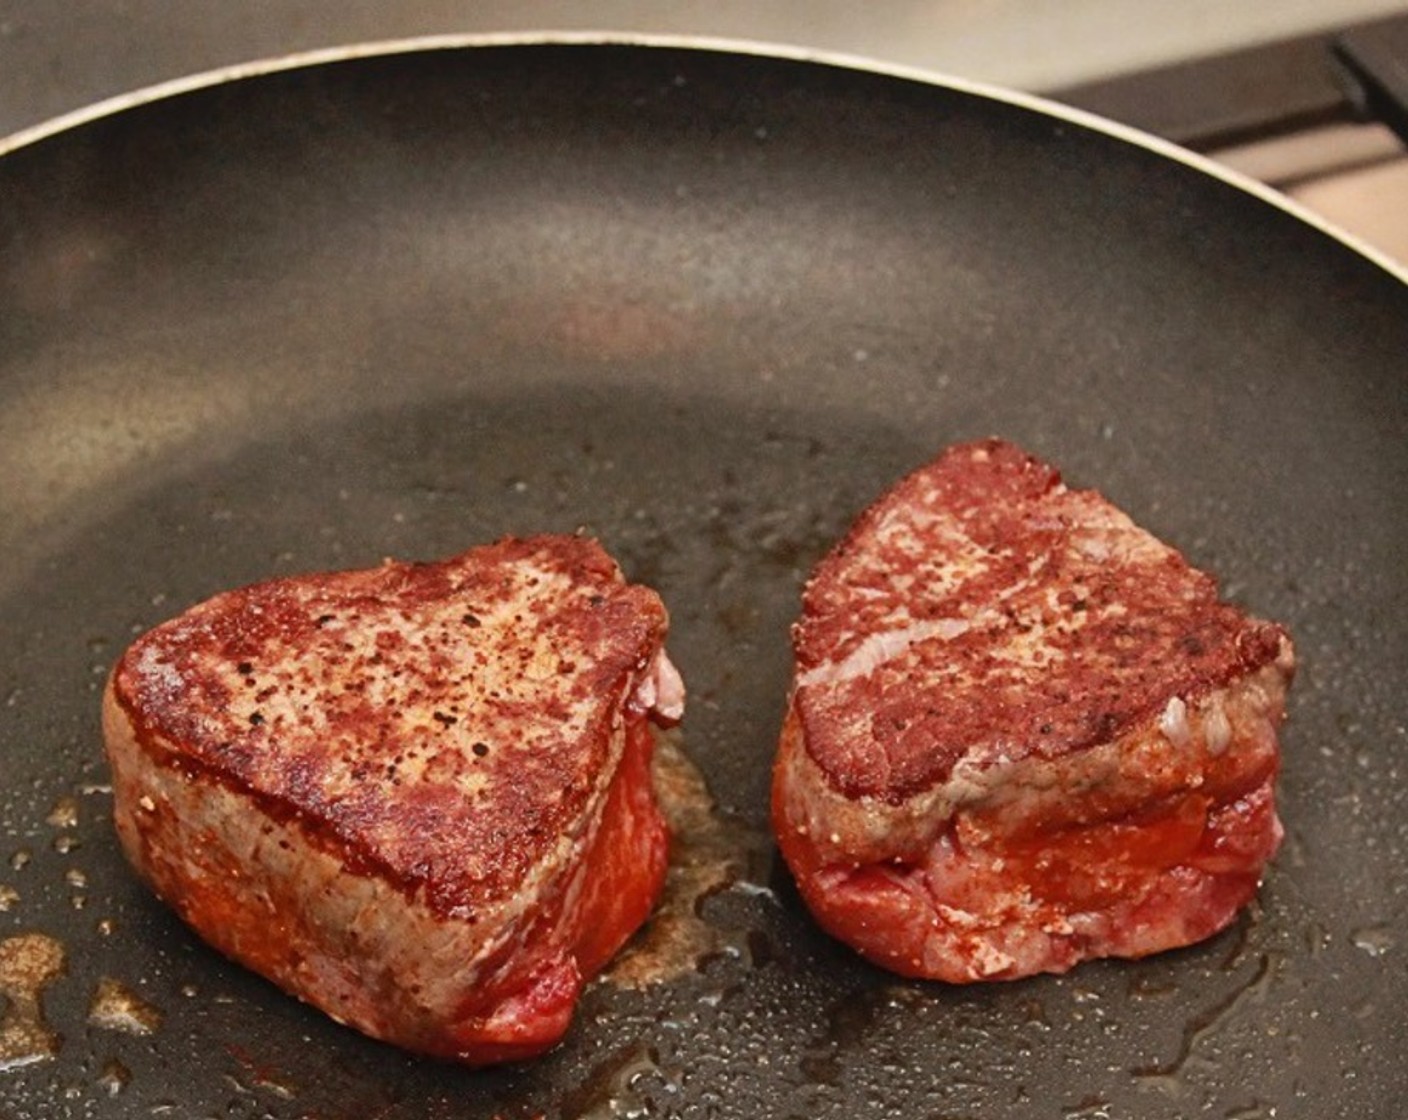 step 8 Heat a sauté pan over medium-high heat, add Cooking Oil (as needed) and add the Filet Mignon. Cook beef without turning for about 2 minutes, or until well browned.